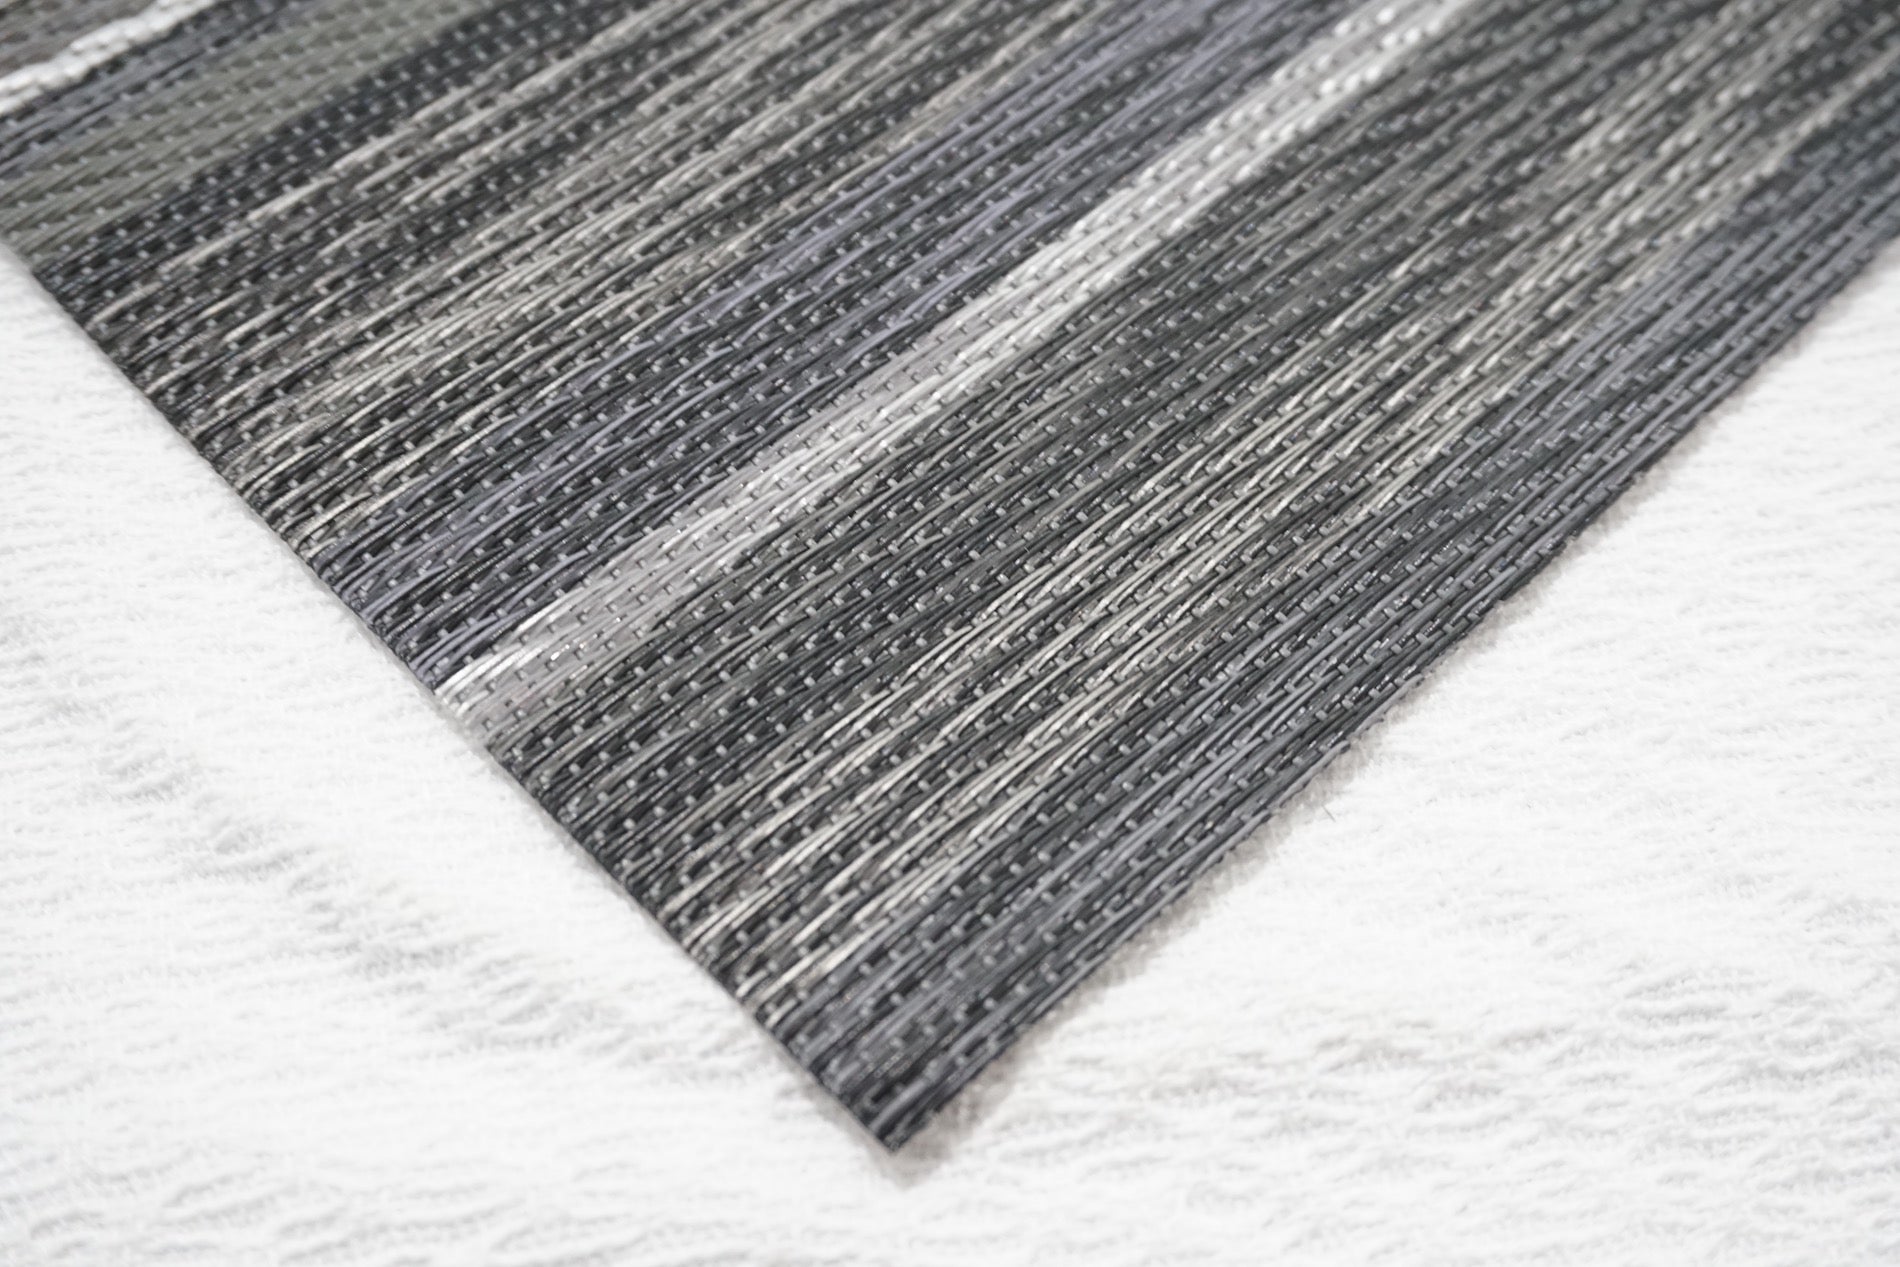 Dainty Home Multistripes Woven Textilene Crossweave With Textured Geometric Stripe Pattern Reversible 15" x 15" Square Placemats